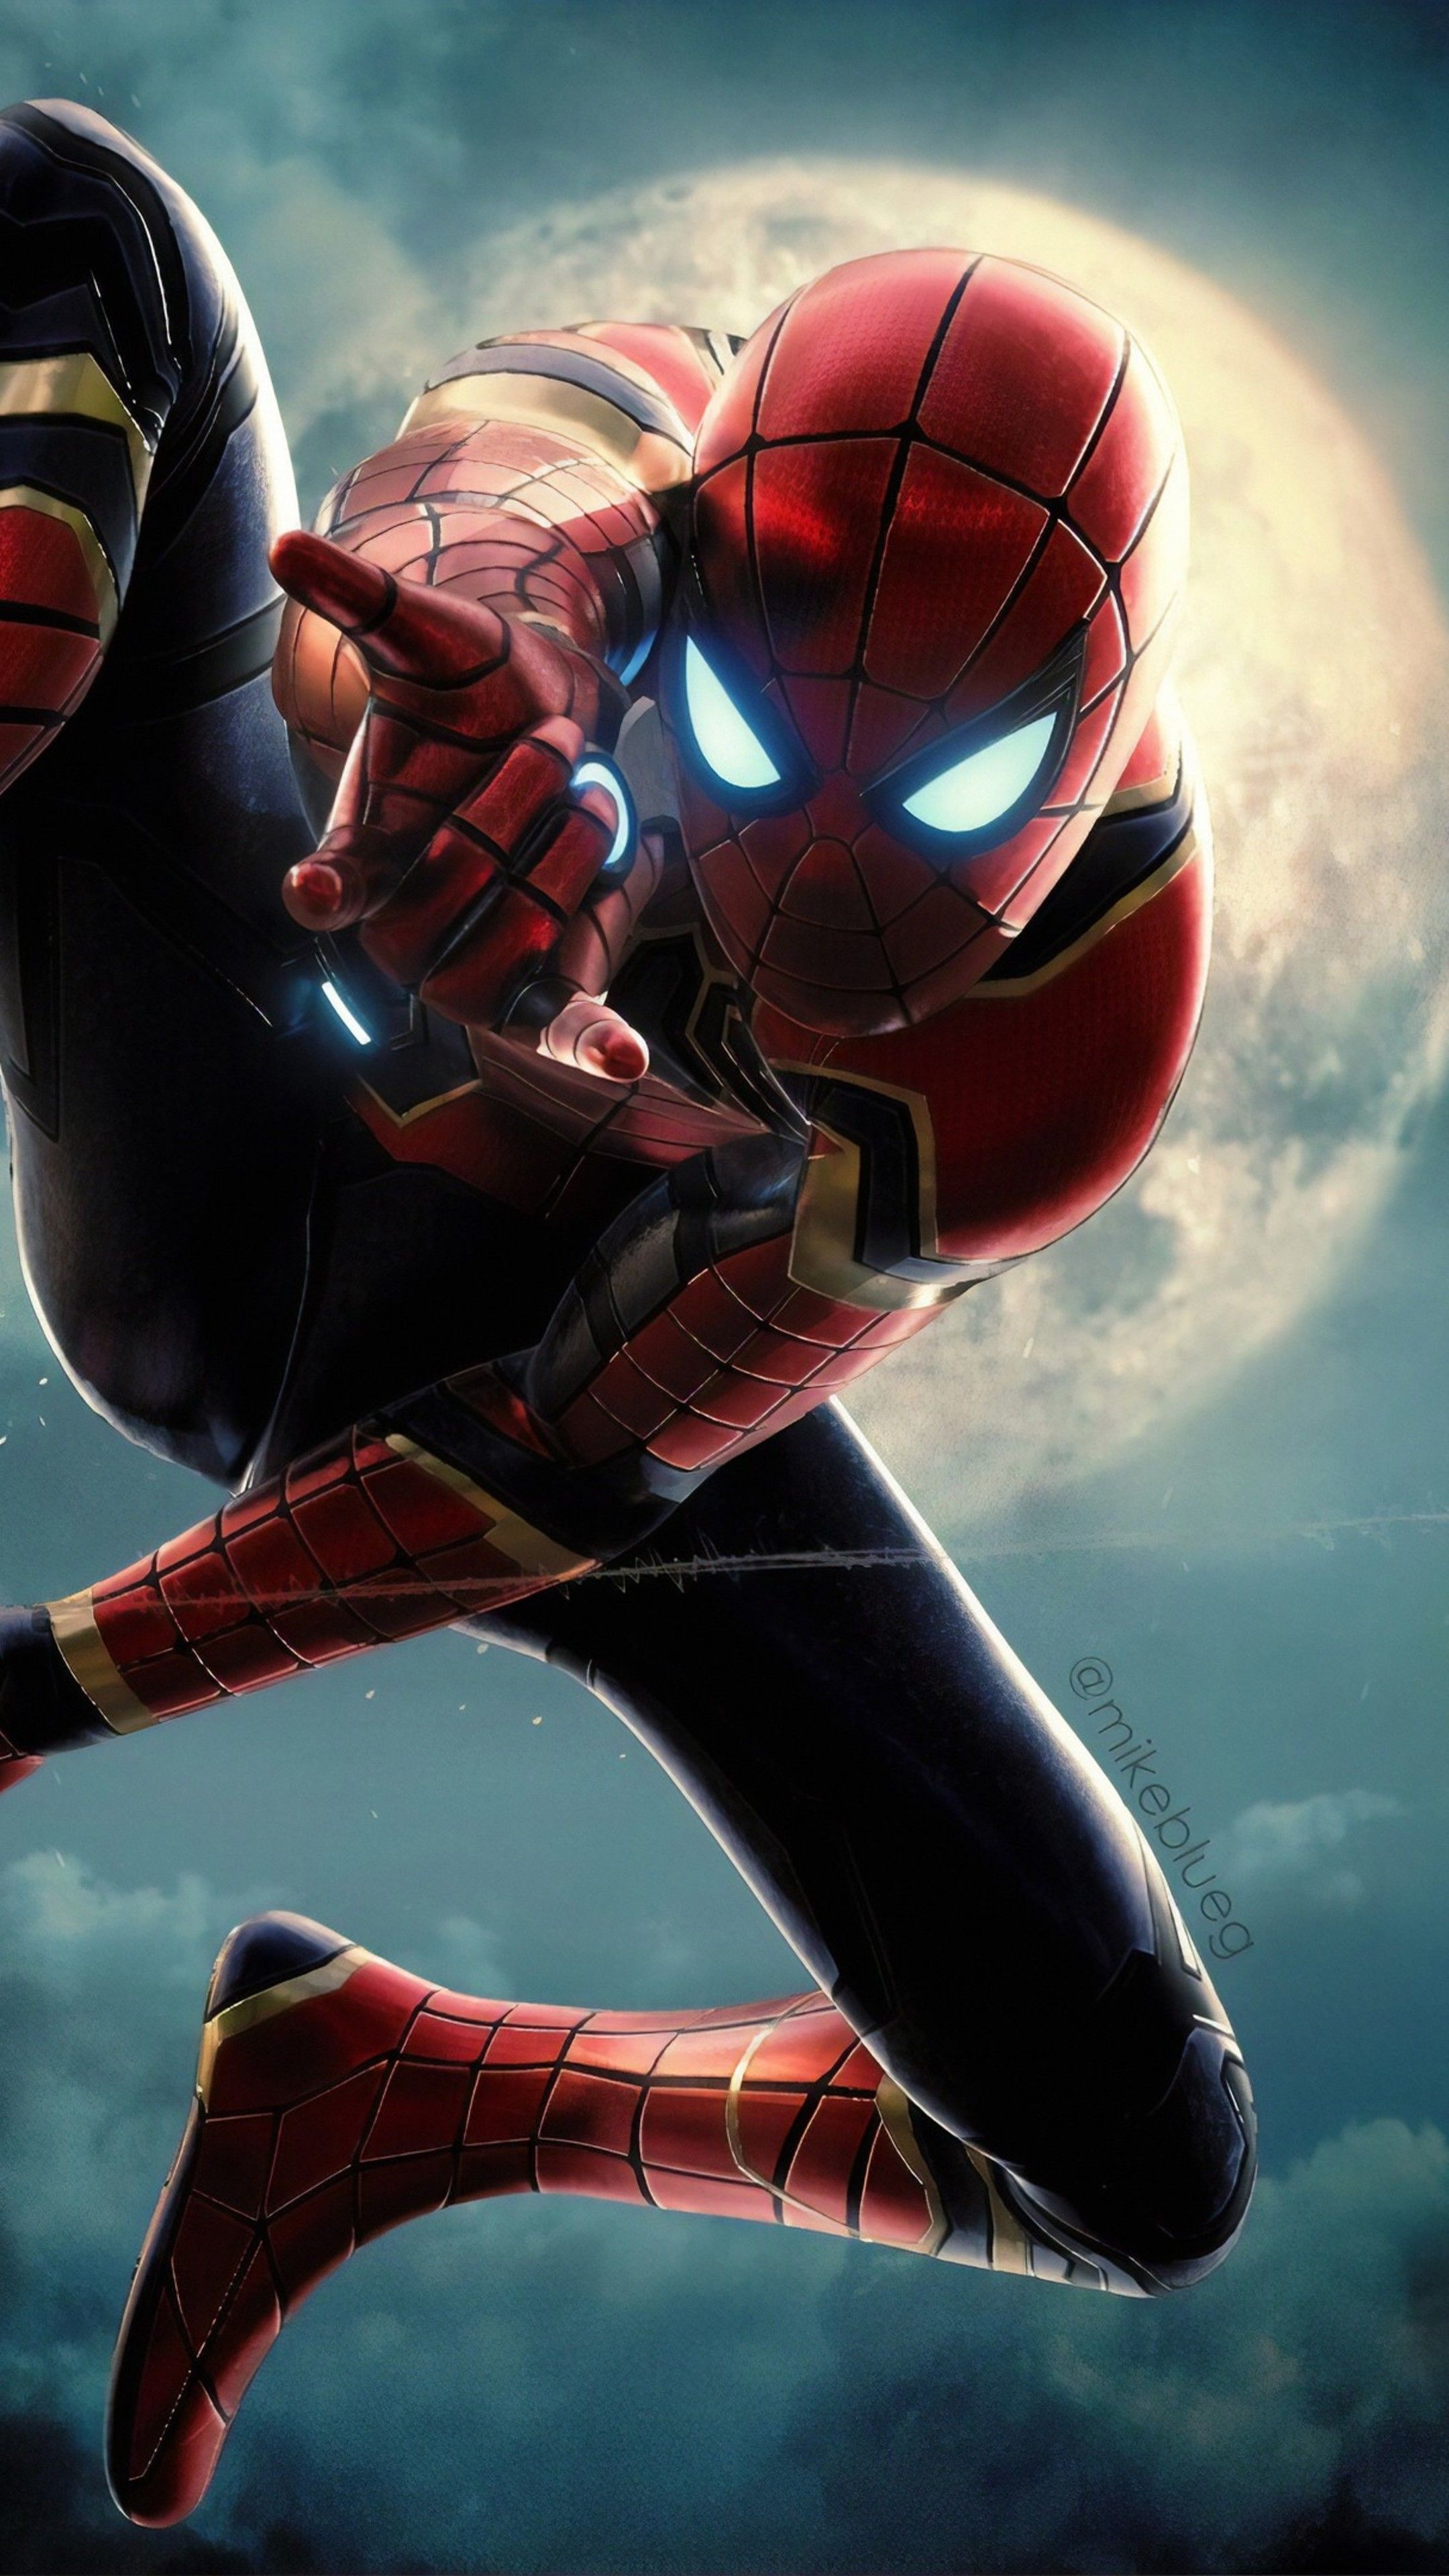 Iron Spider, Spider-Man 4K wallpapers, HDQWalls, Artwork wallpapers, 2160x3840 4K Phone